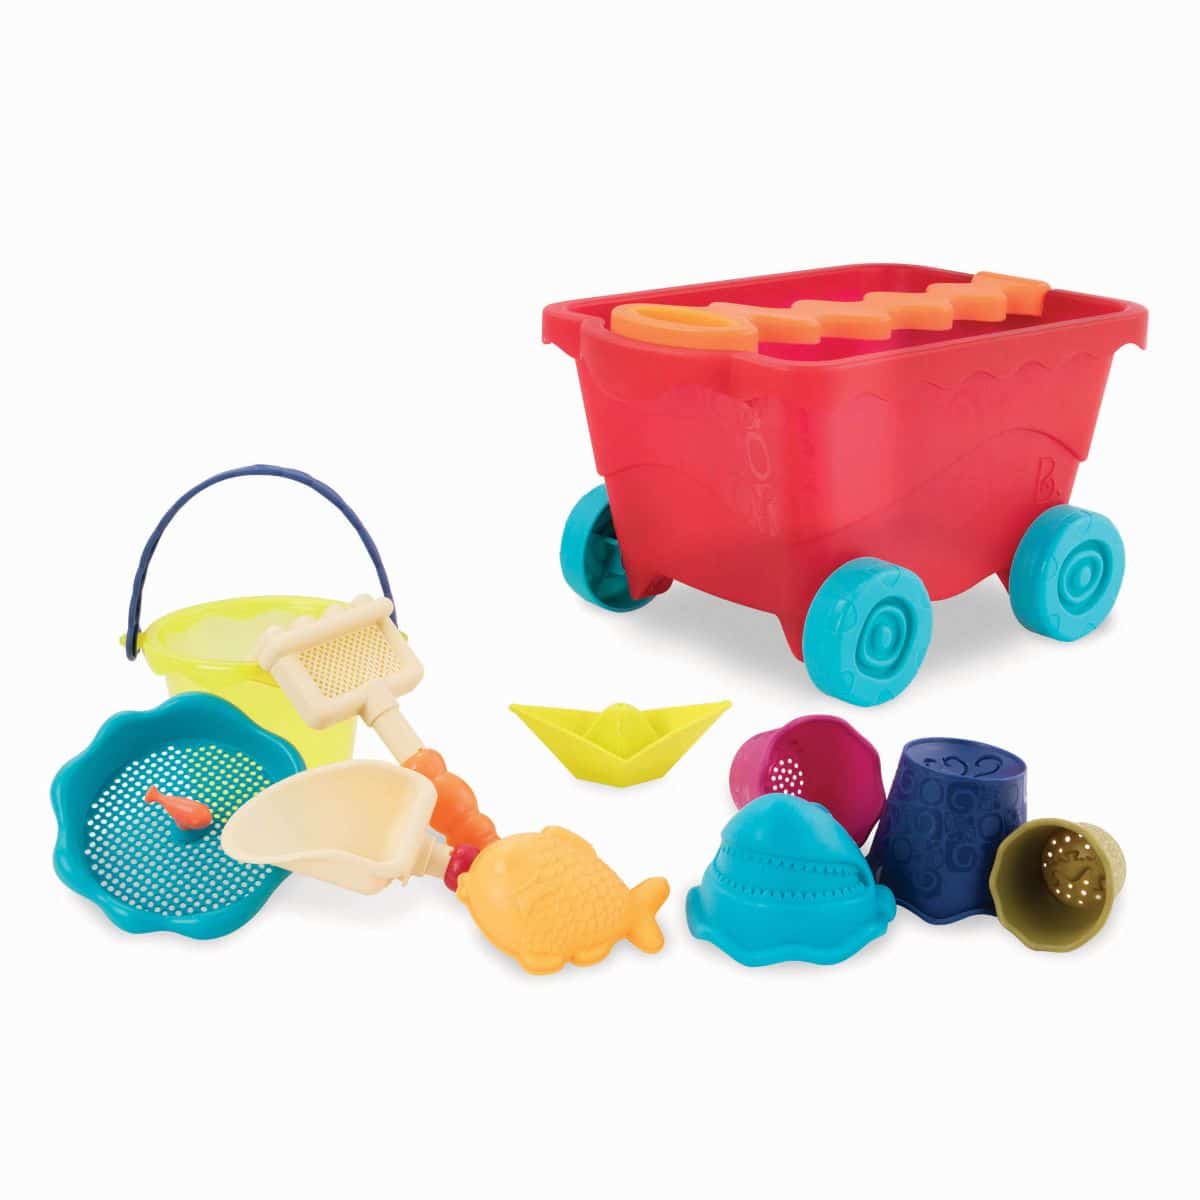 Beach toys and translucent red wagon